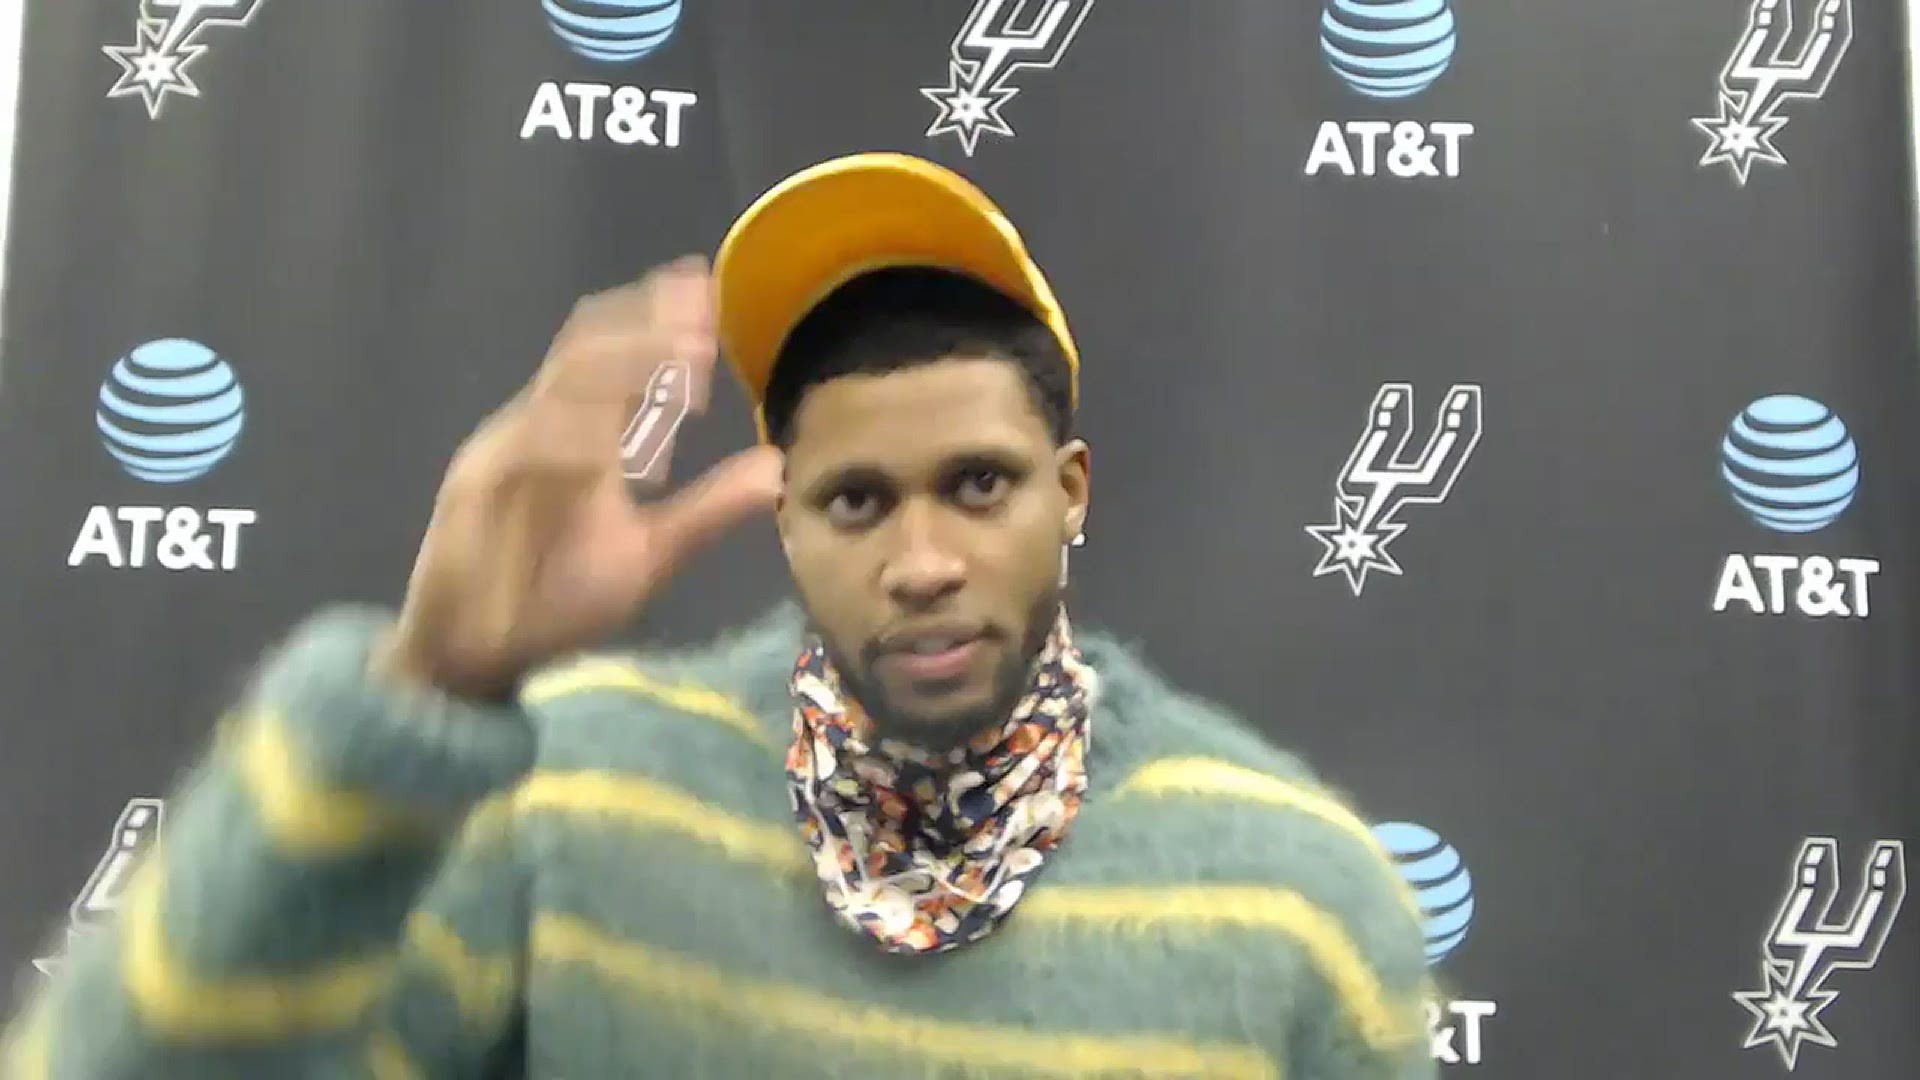 Thru The Lens: (INTERVIEW): Getting to Know Rudy Gay 